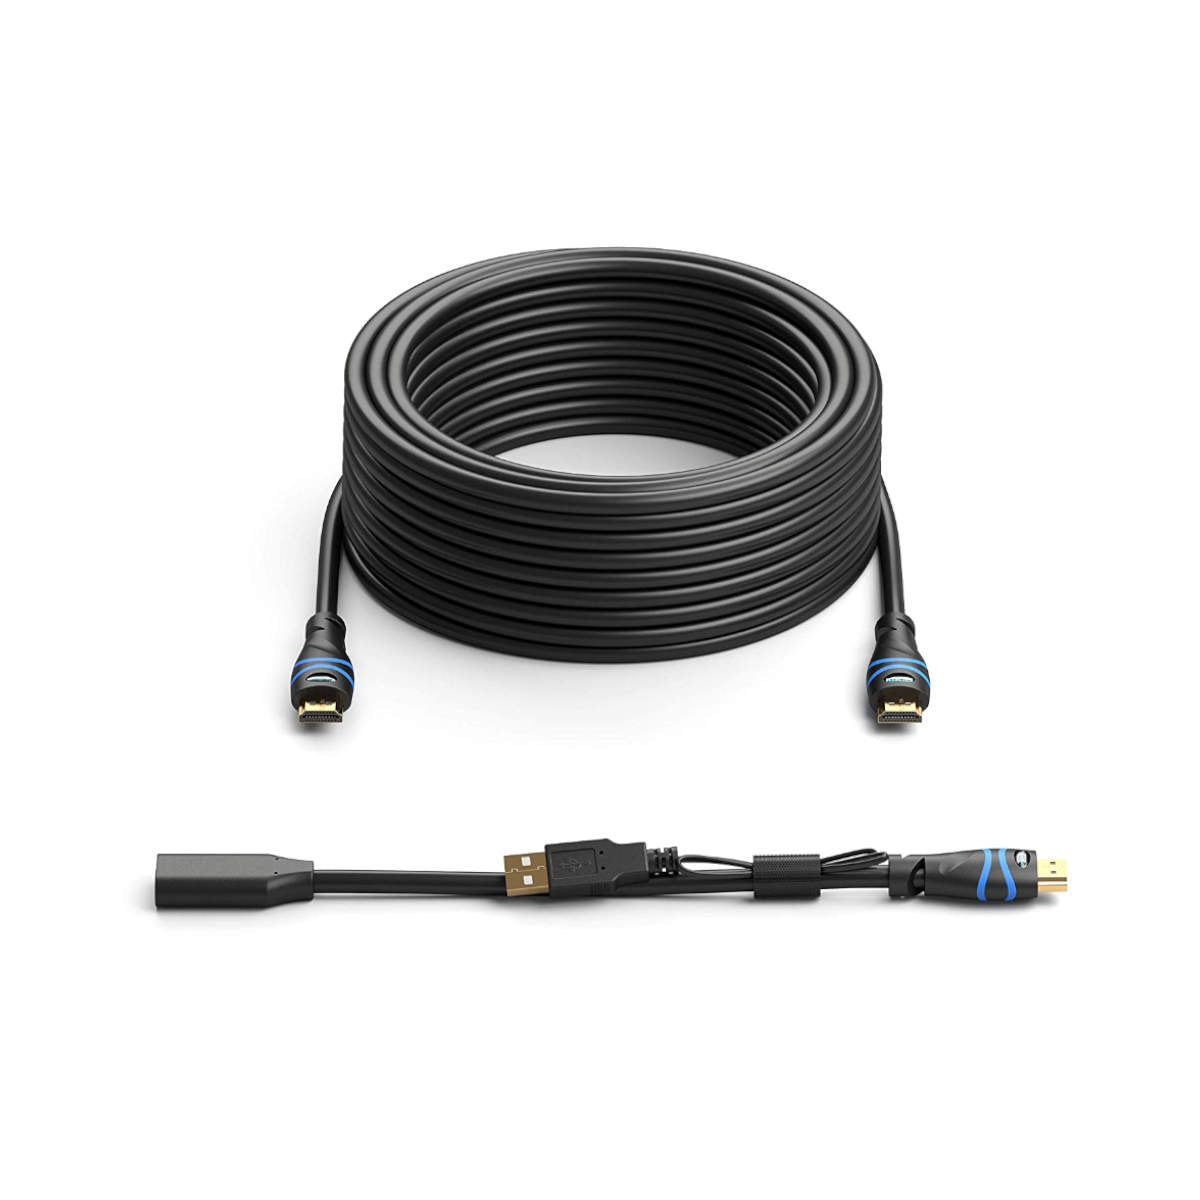 BlueRigger High Speed HDMI Cable with Ethernet CL3 Rated for In-wall Installation (15 ft to 100 ft) - Ooberpad